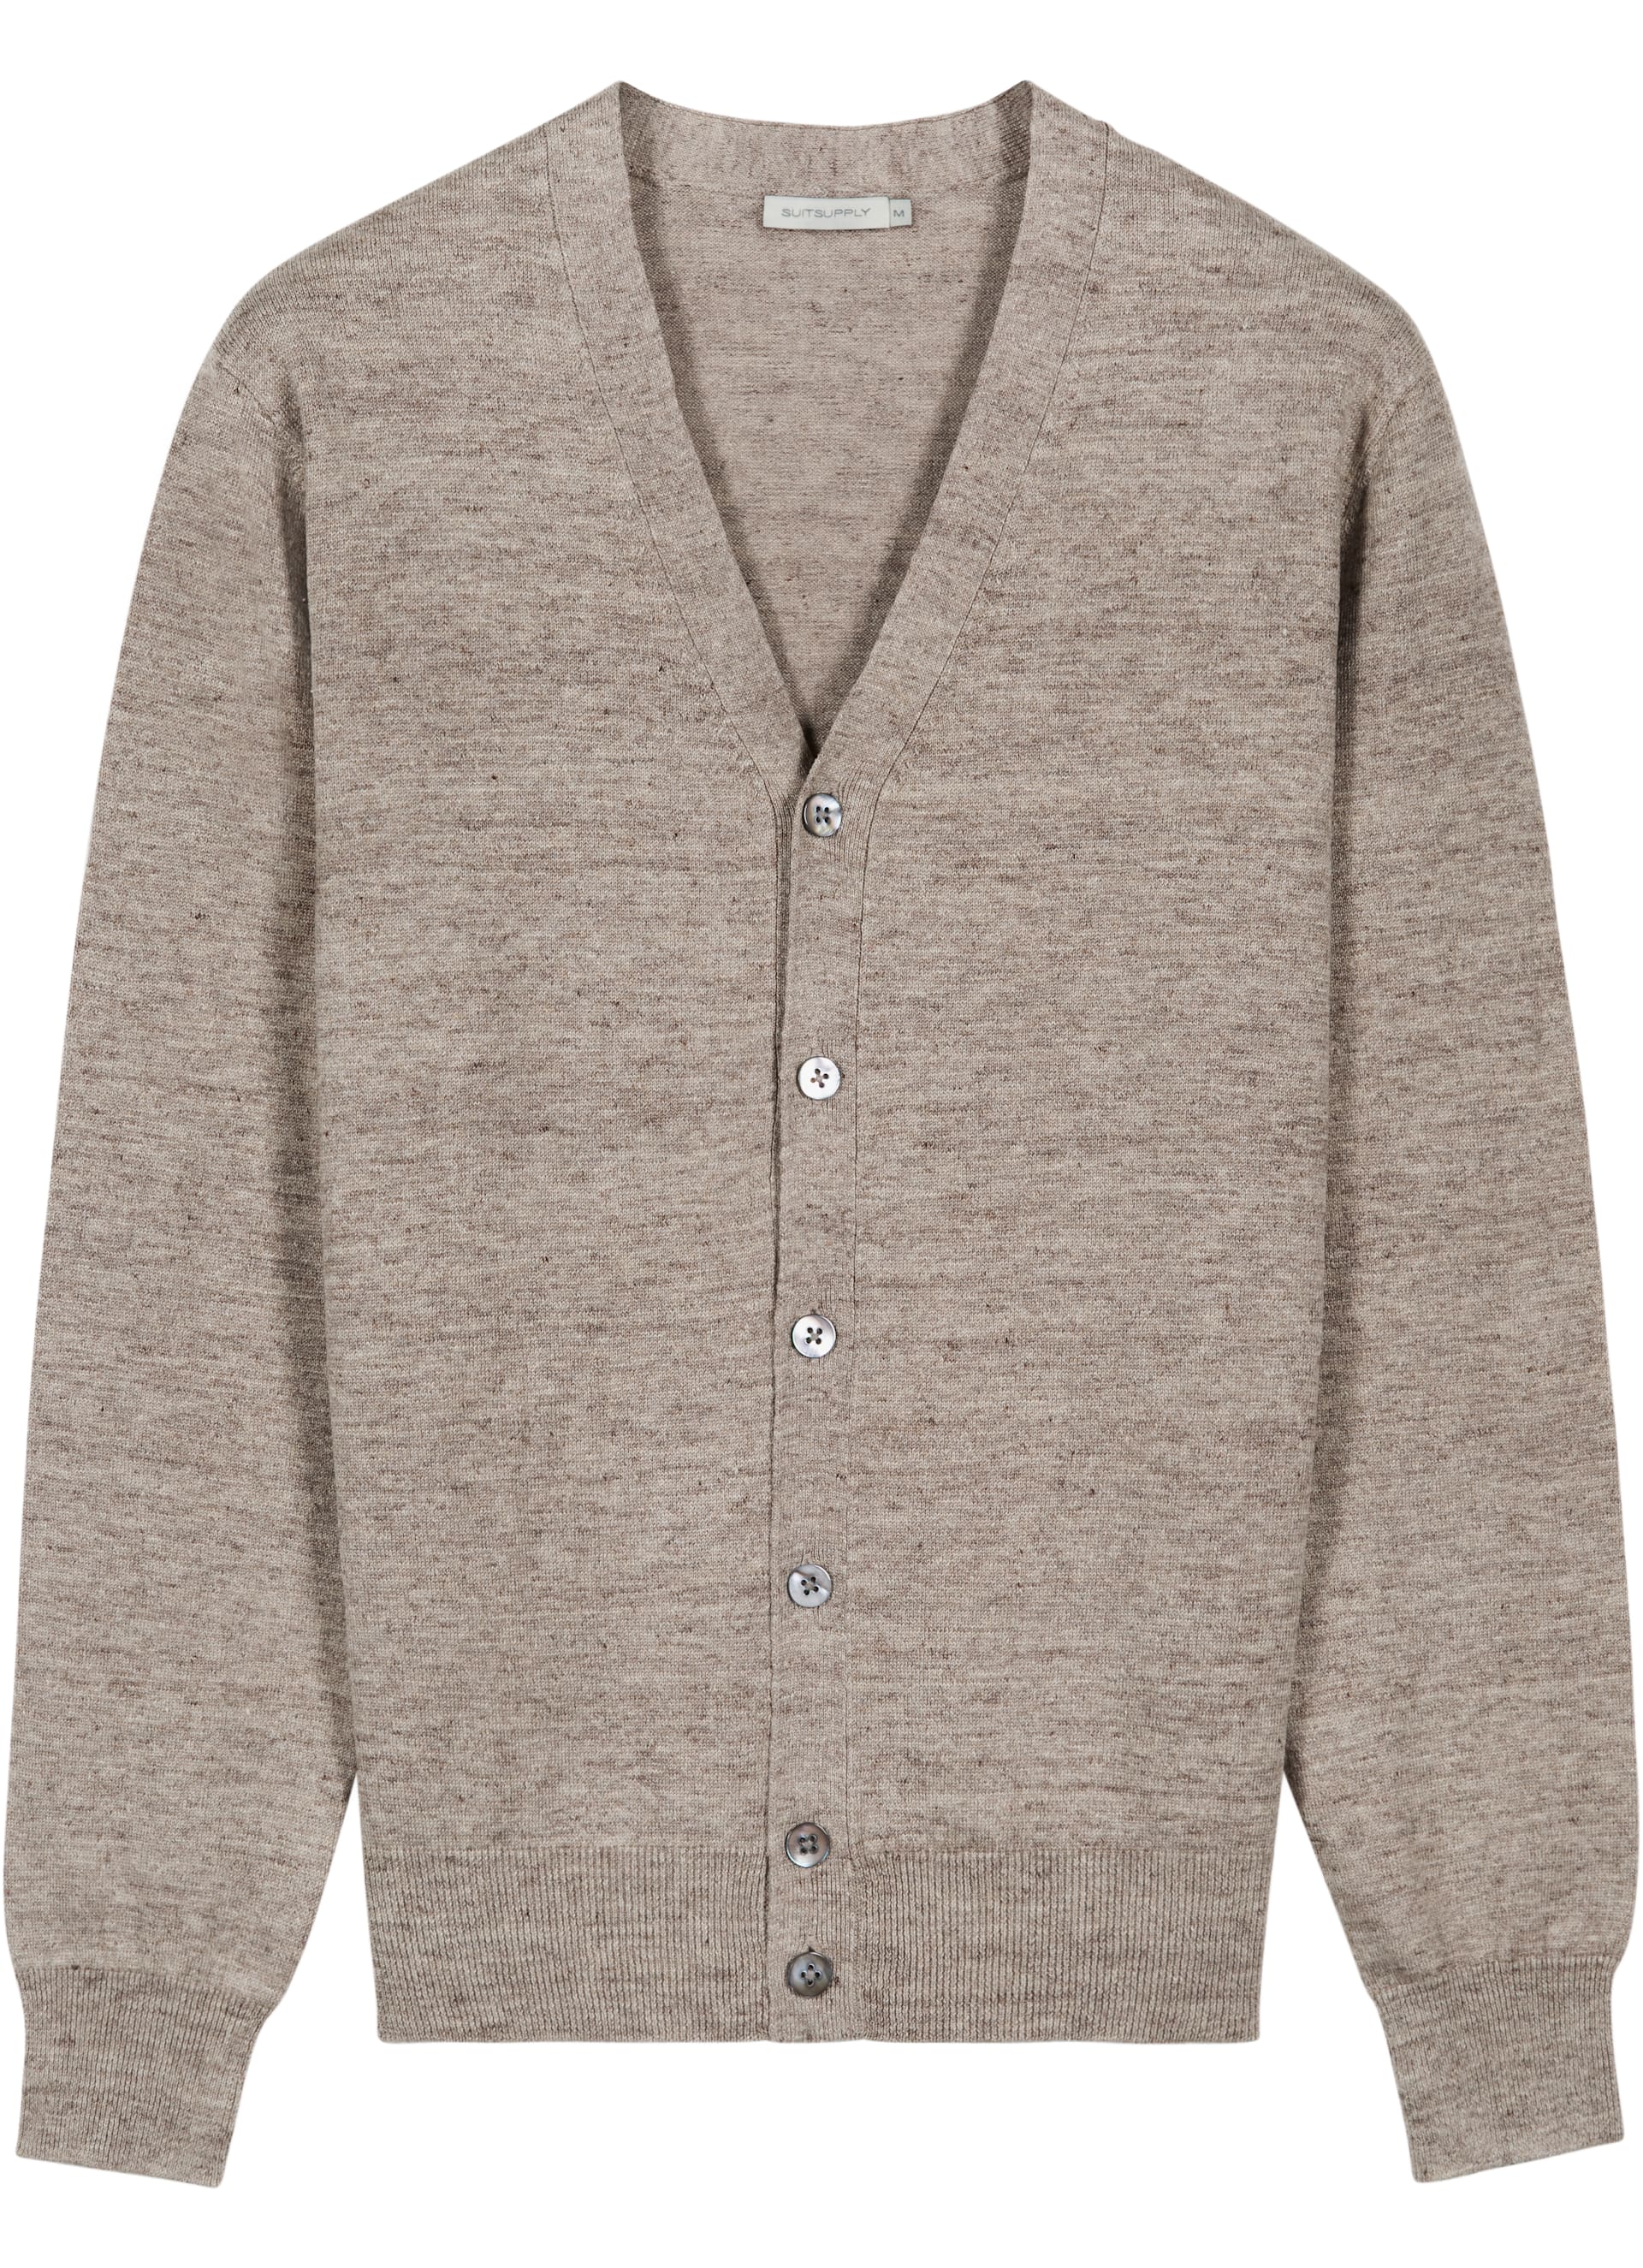 Brown Cardigan Sw800 | Suitsupply Online Store